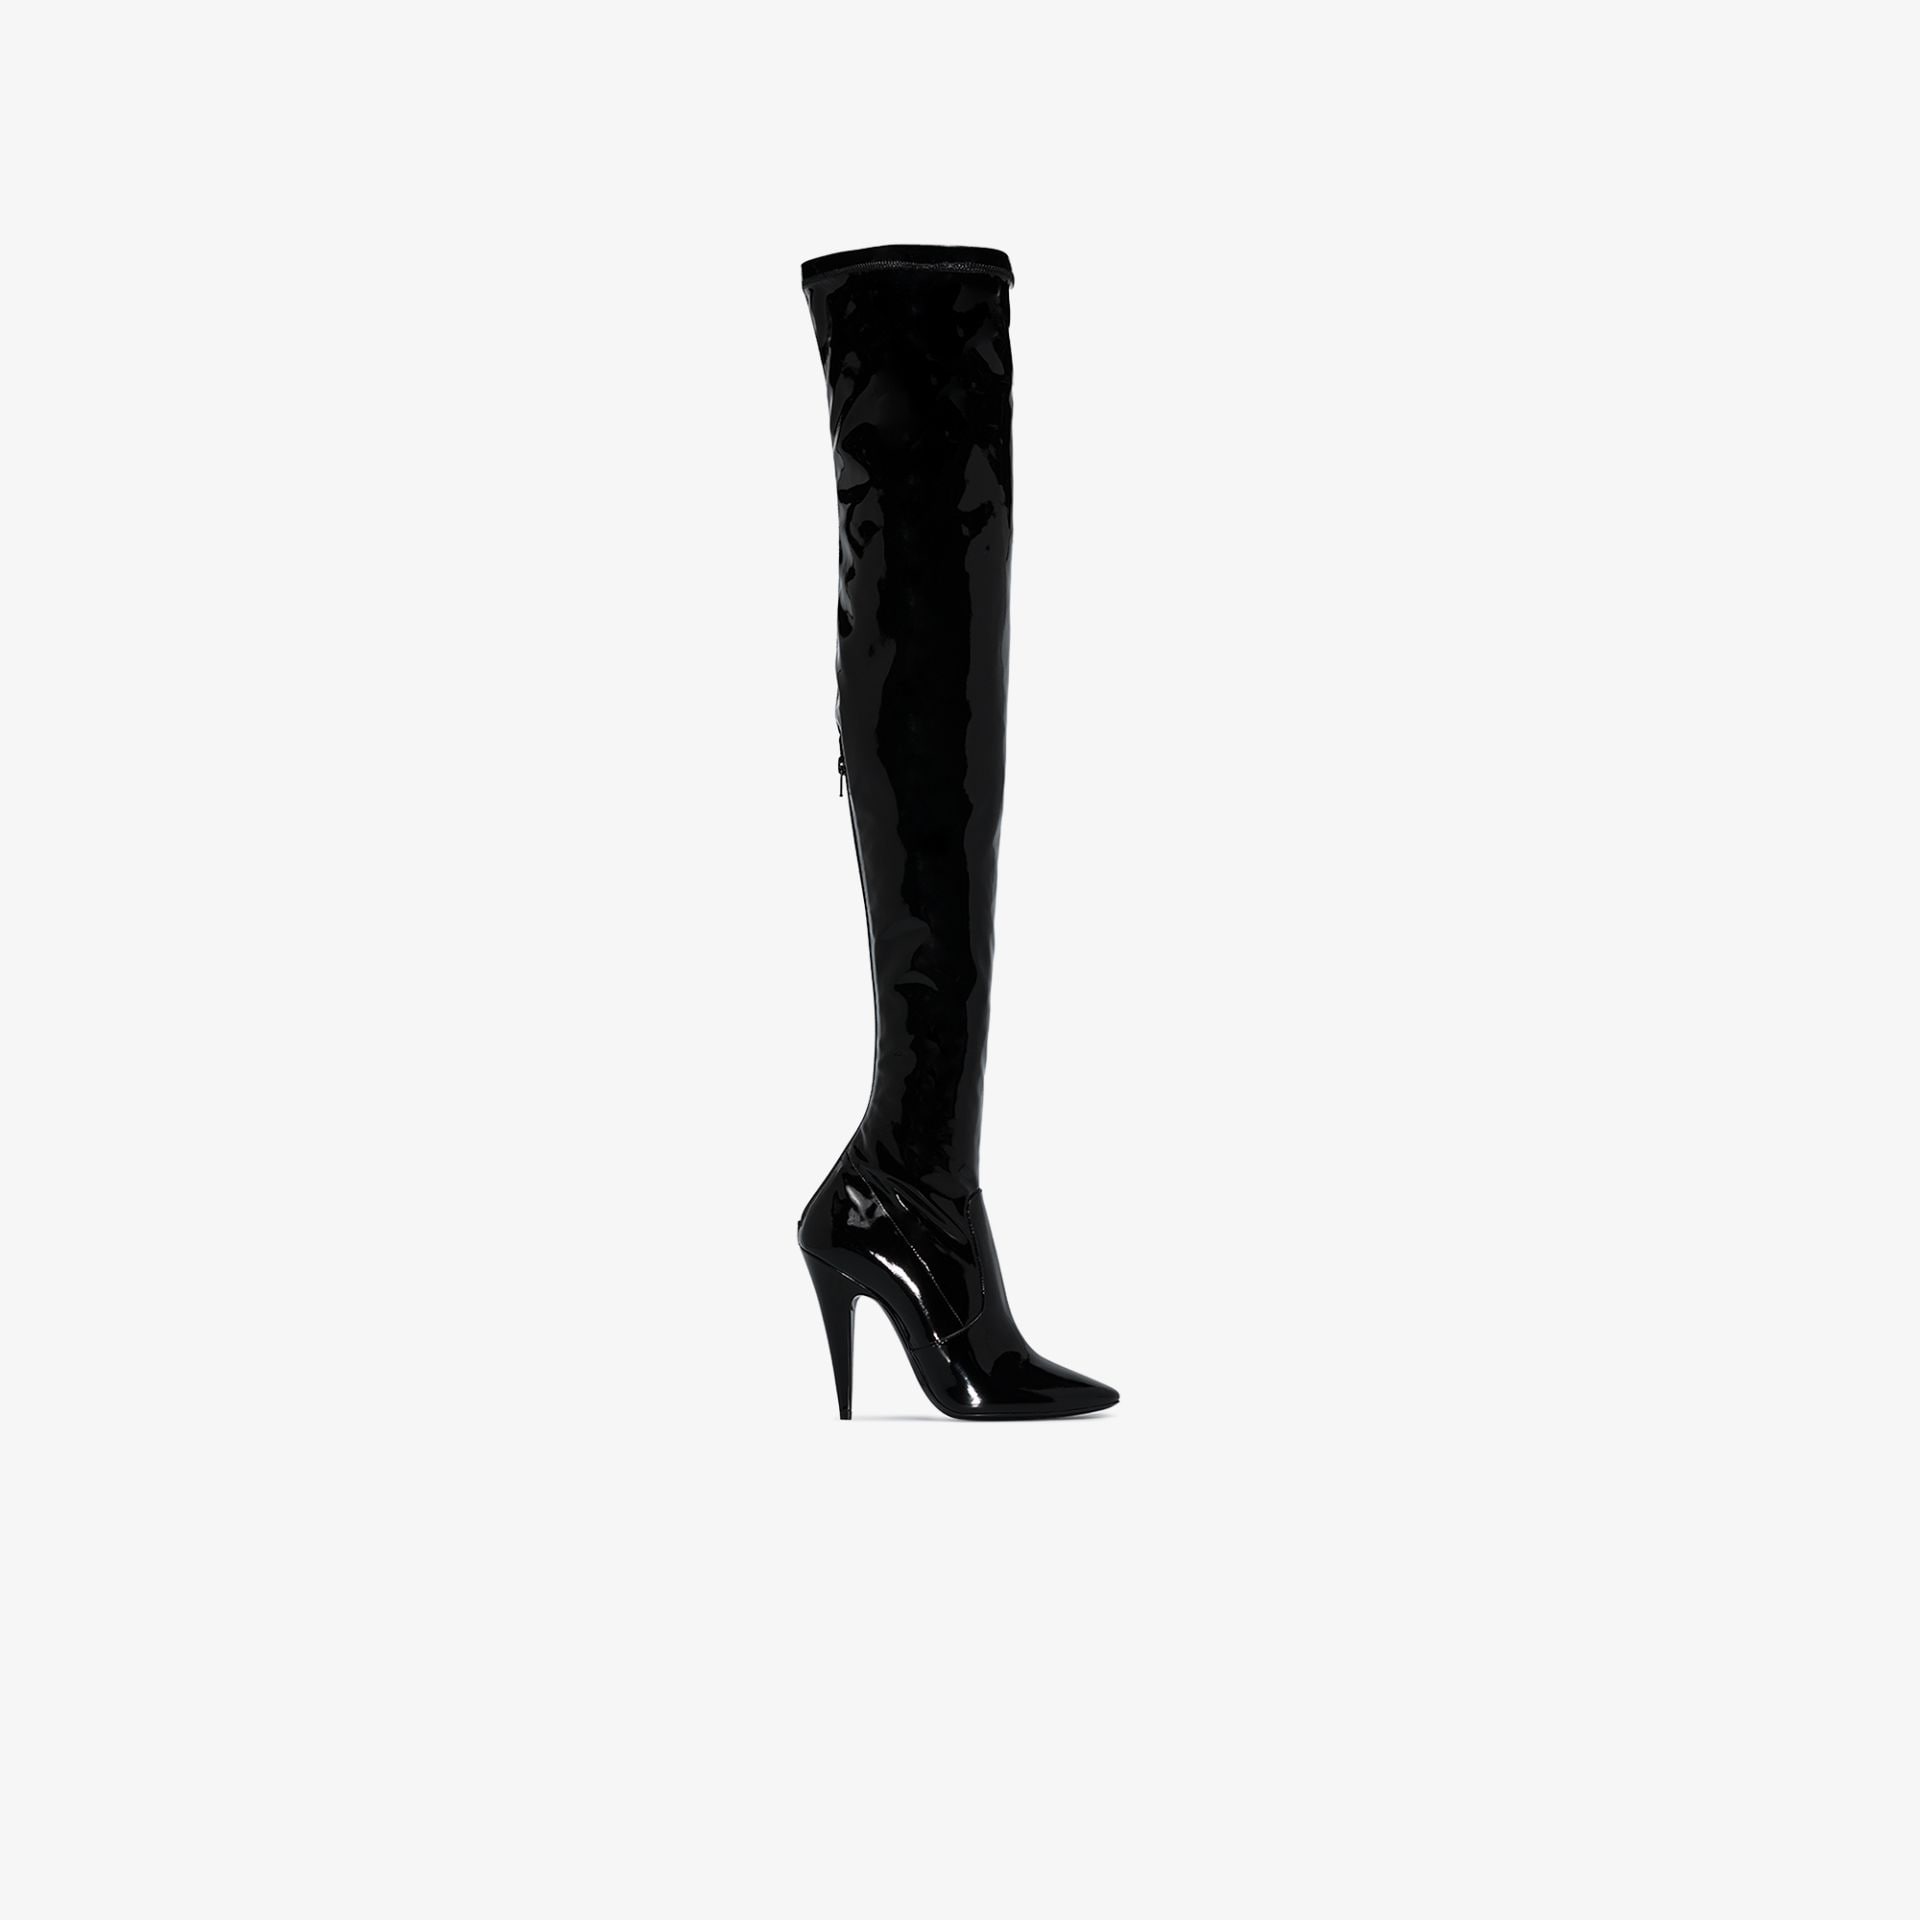 thigh high patent leather boots